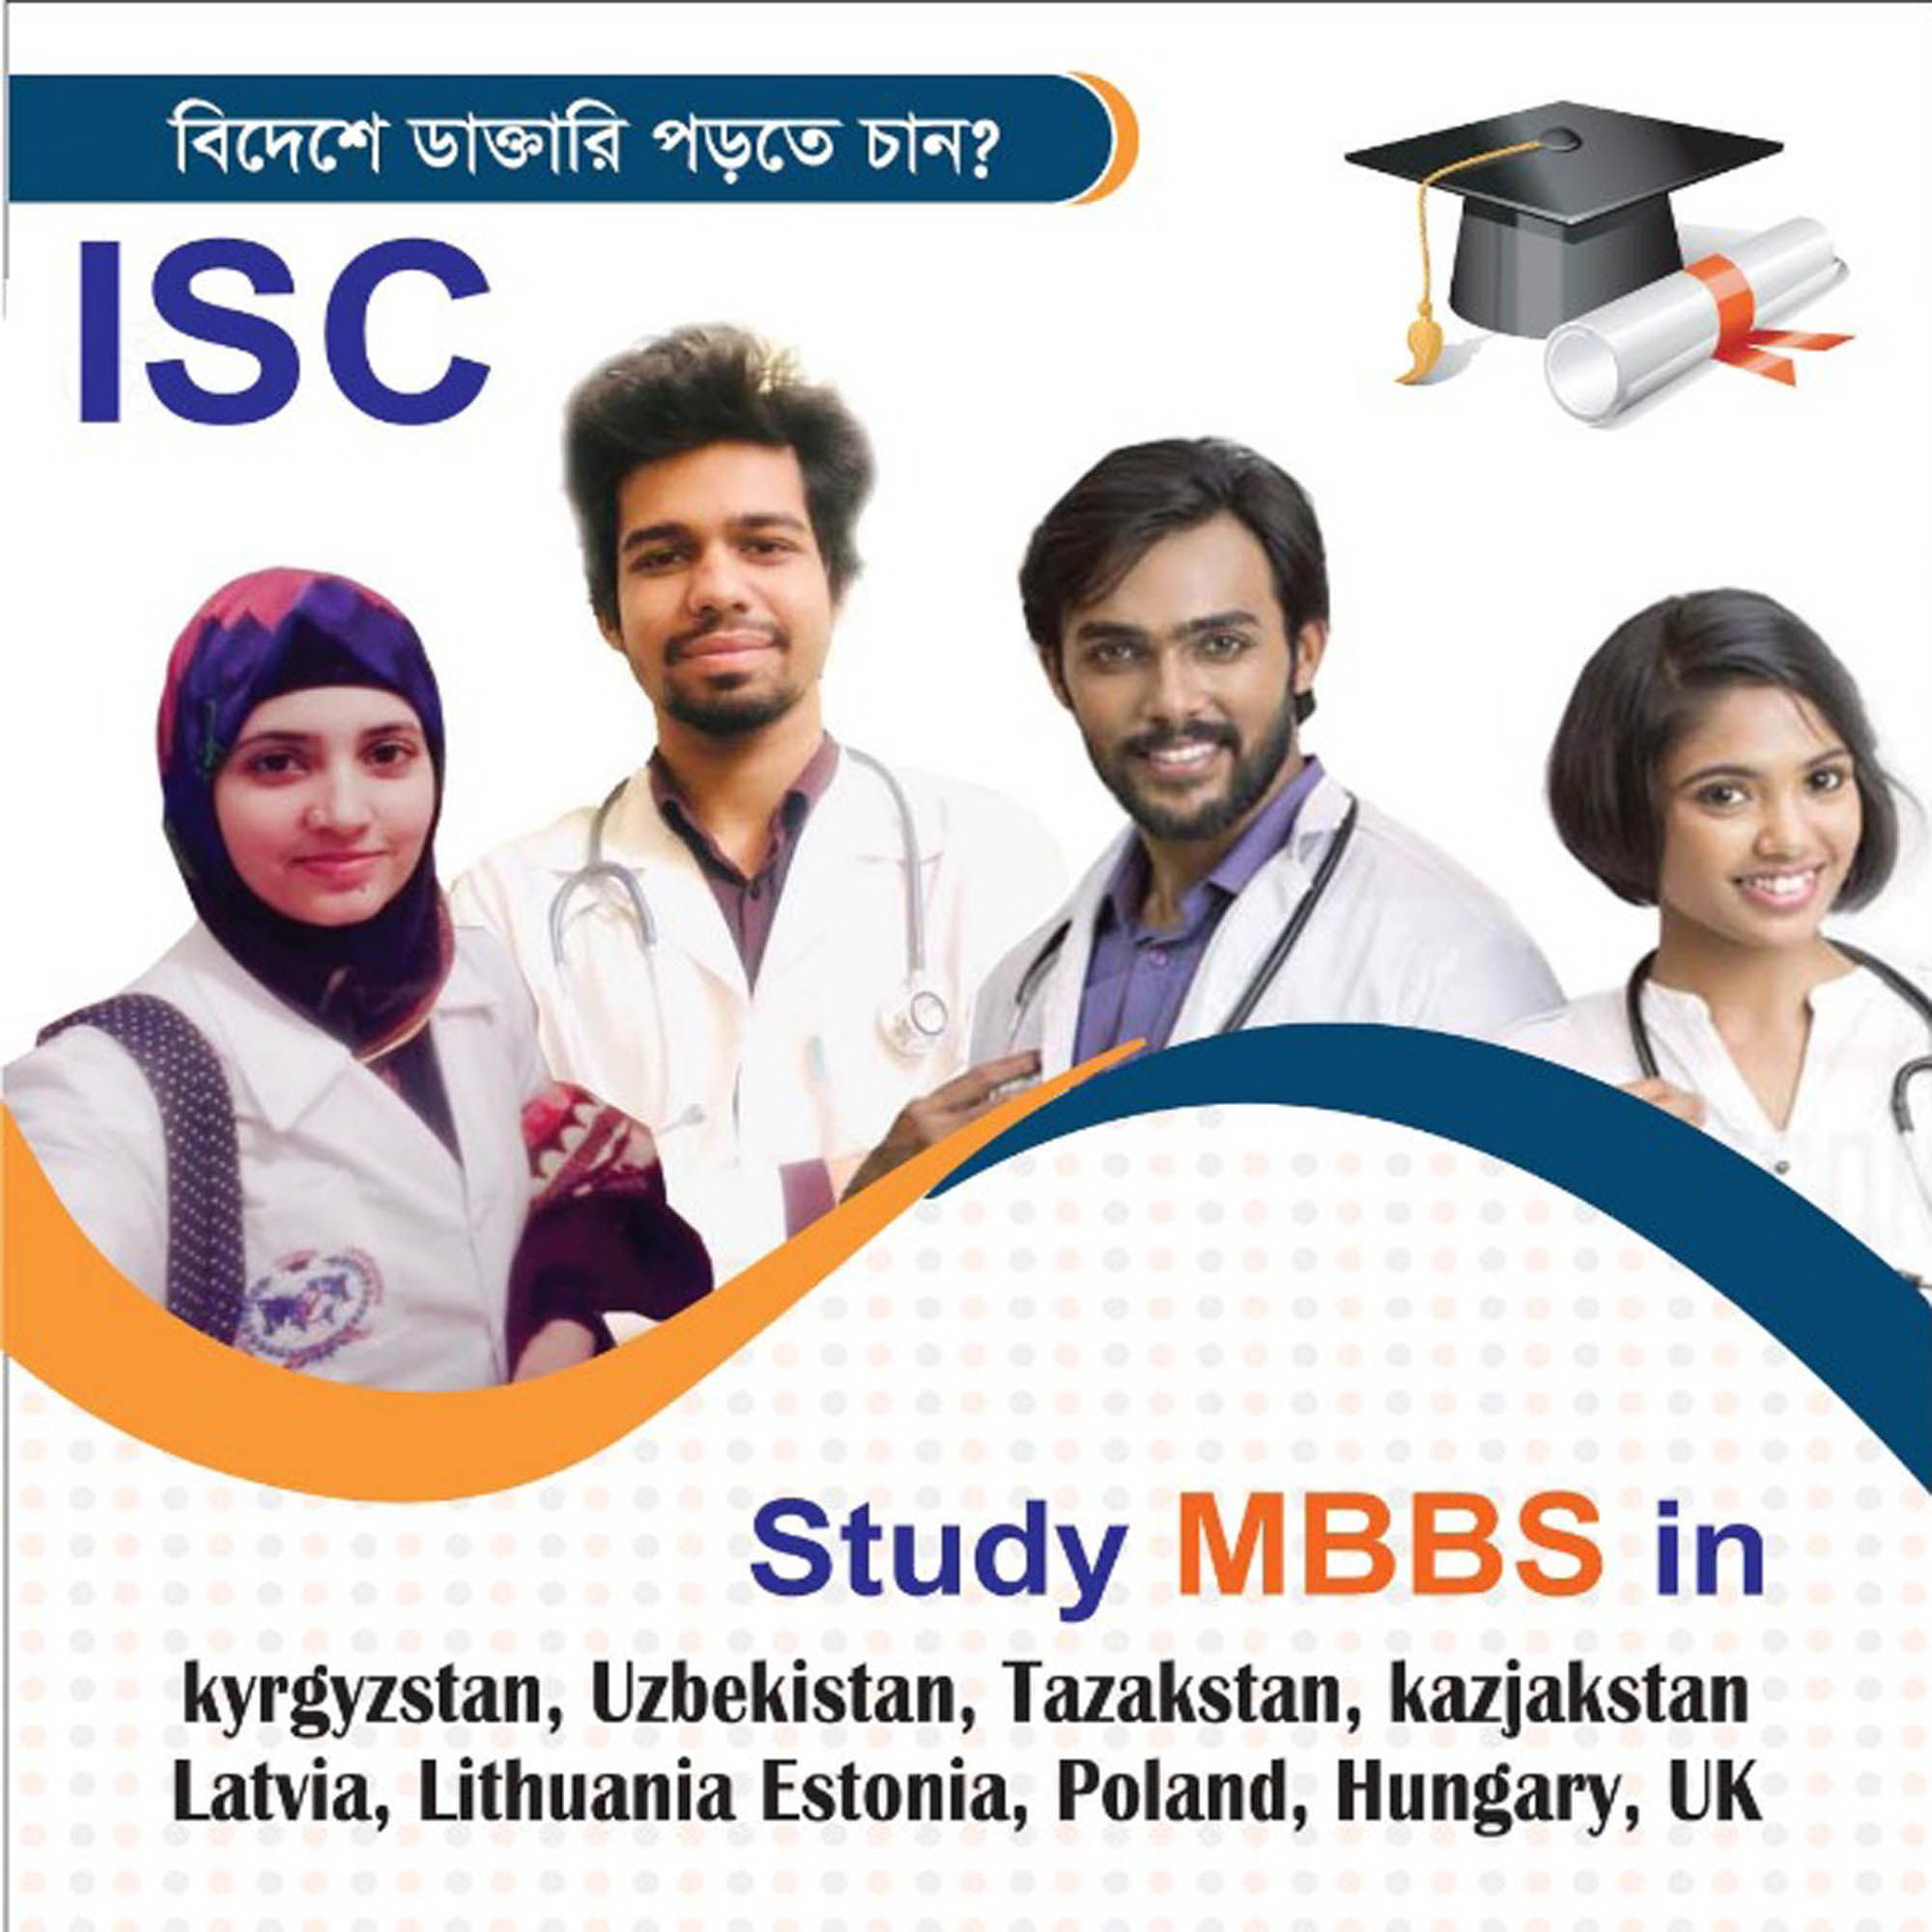 Studying MBBS in Central Asian Countries: A Great Opportunity for International Students